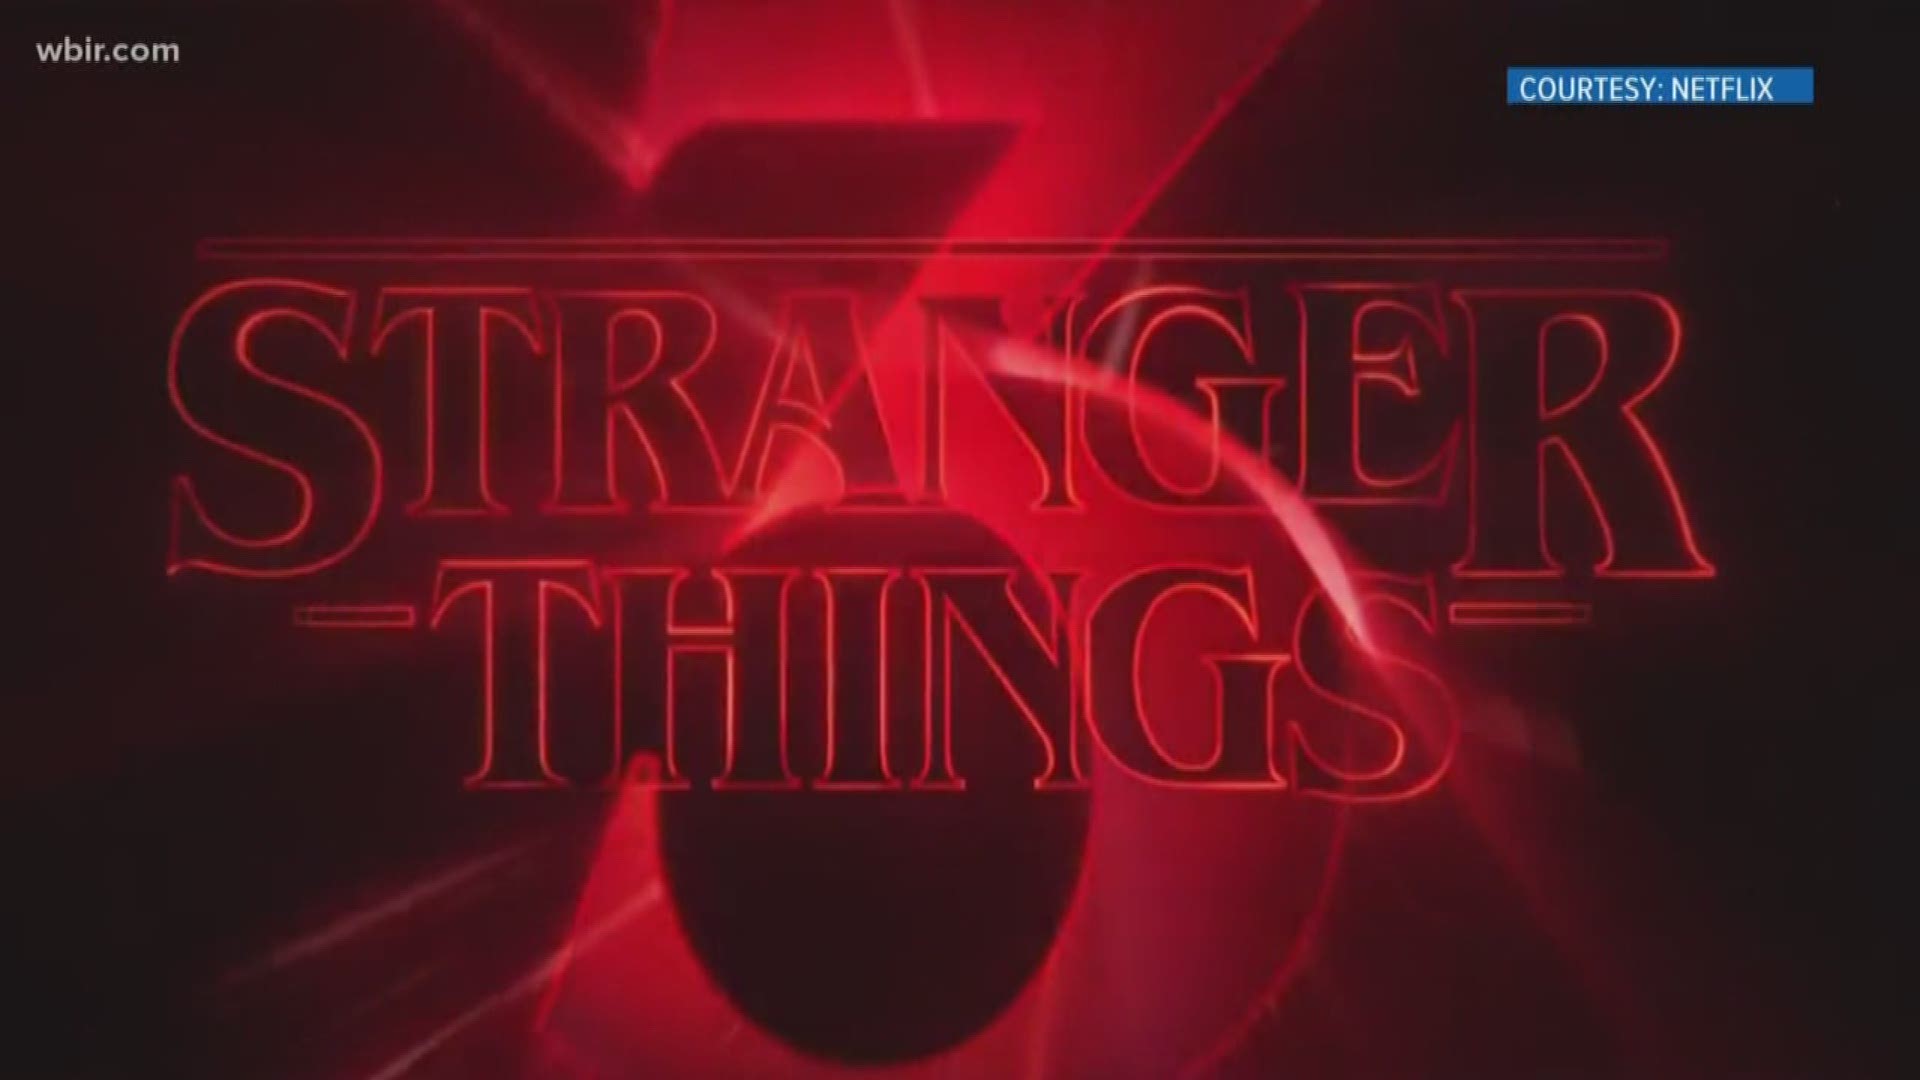 Theories about the East Tennessee connection to the popular Netflix show Stranger Things are resurfacing ahead of the season three release.